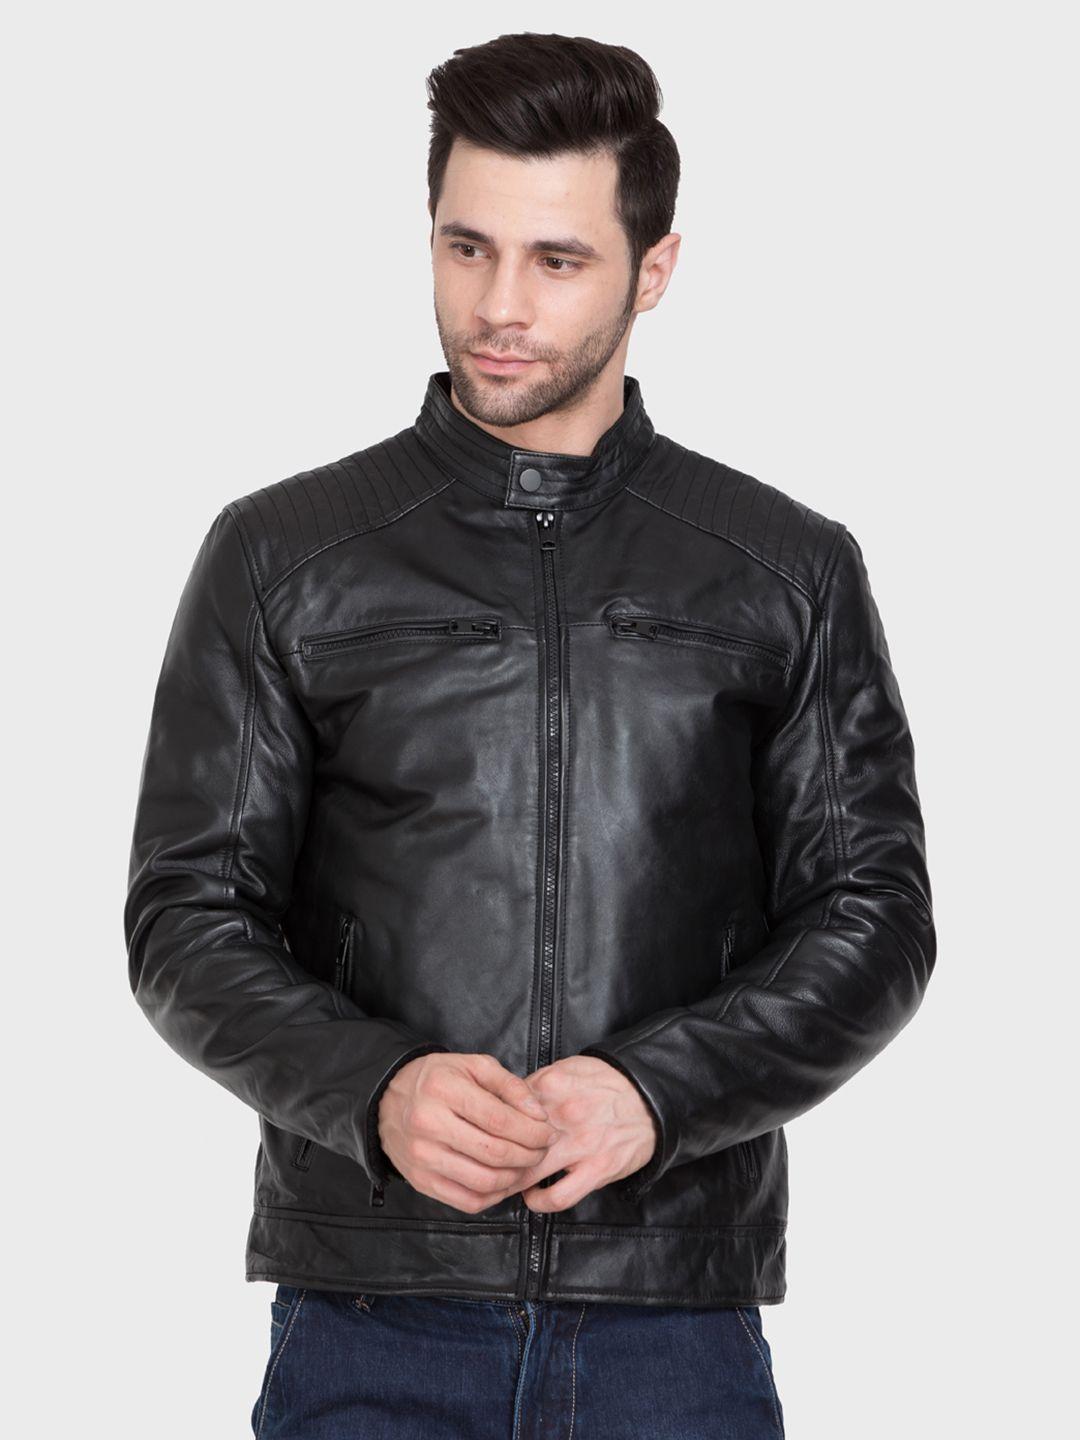 justanned stand collar lightweight leather jacket